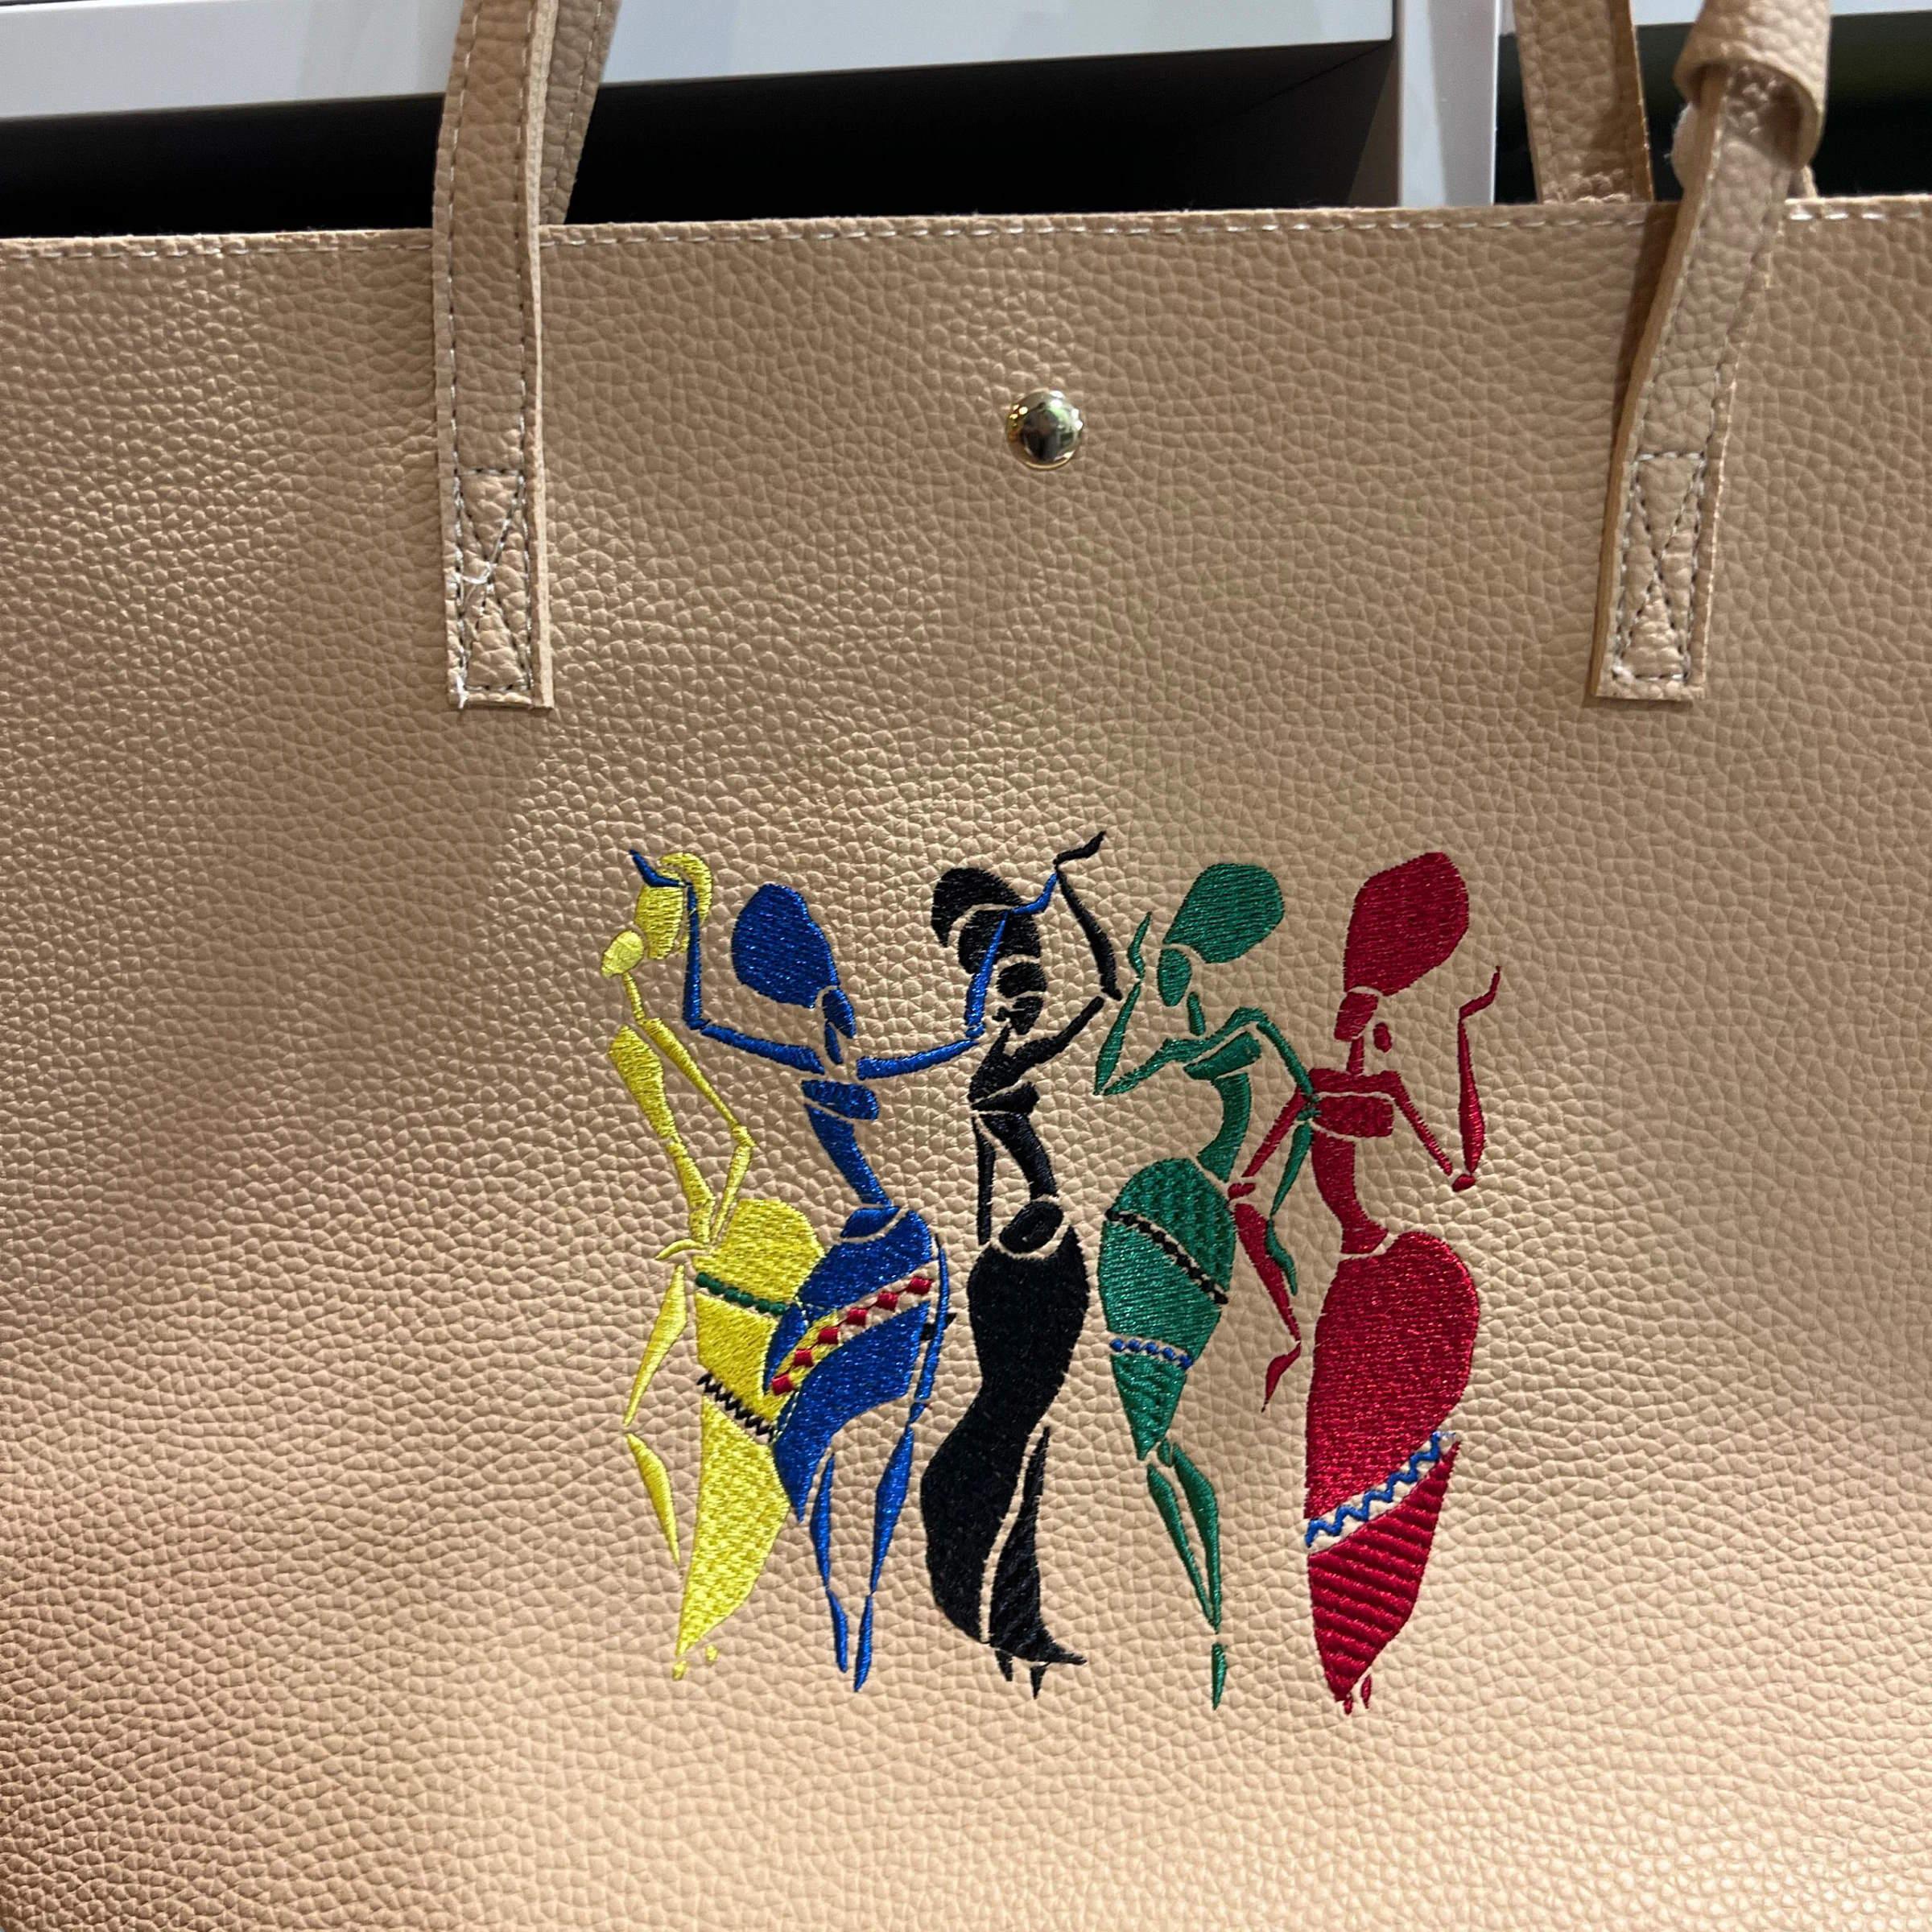 Dancing Woman Embroidery Design on a Leather Bag | Elevate Your Style